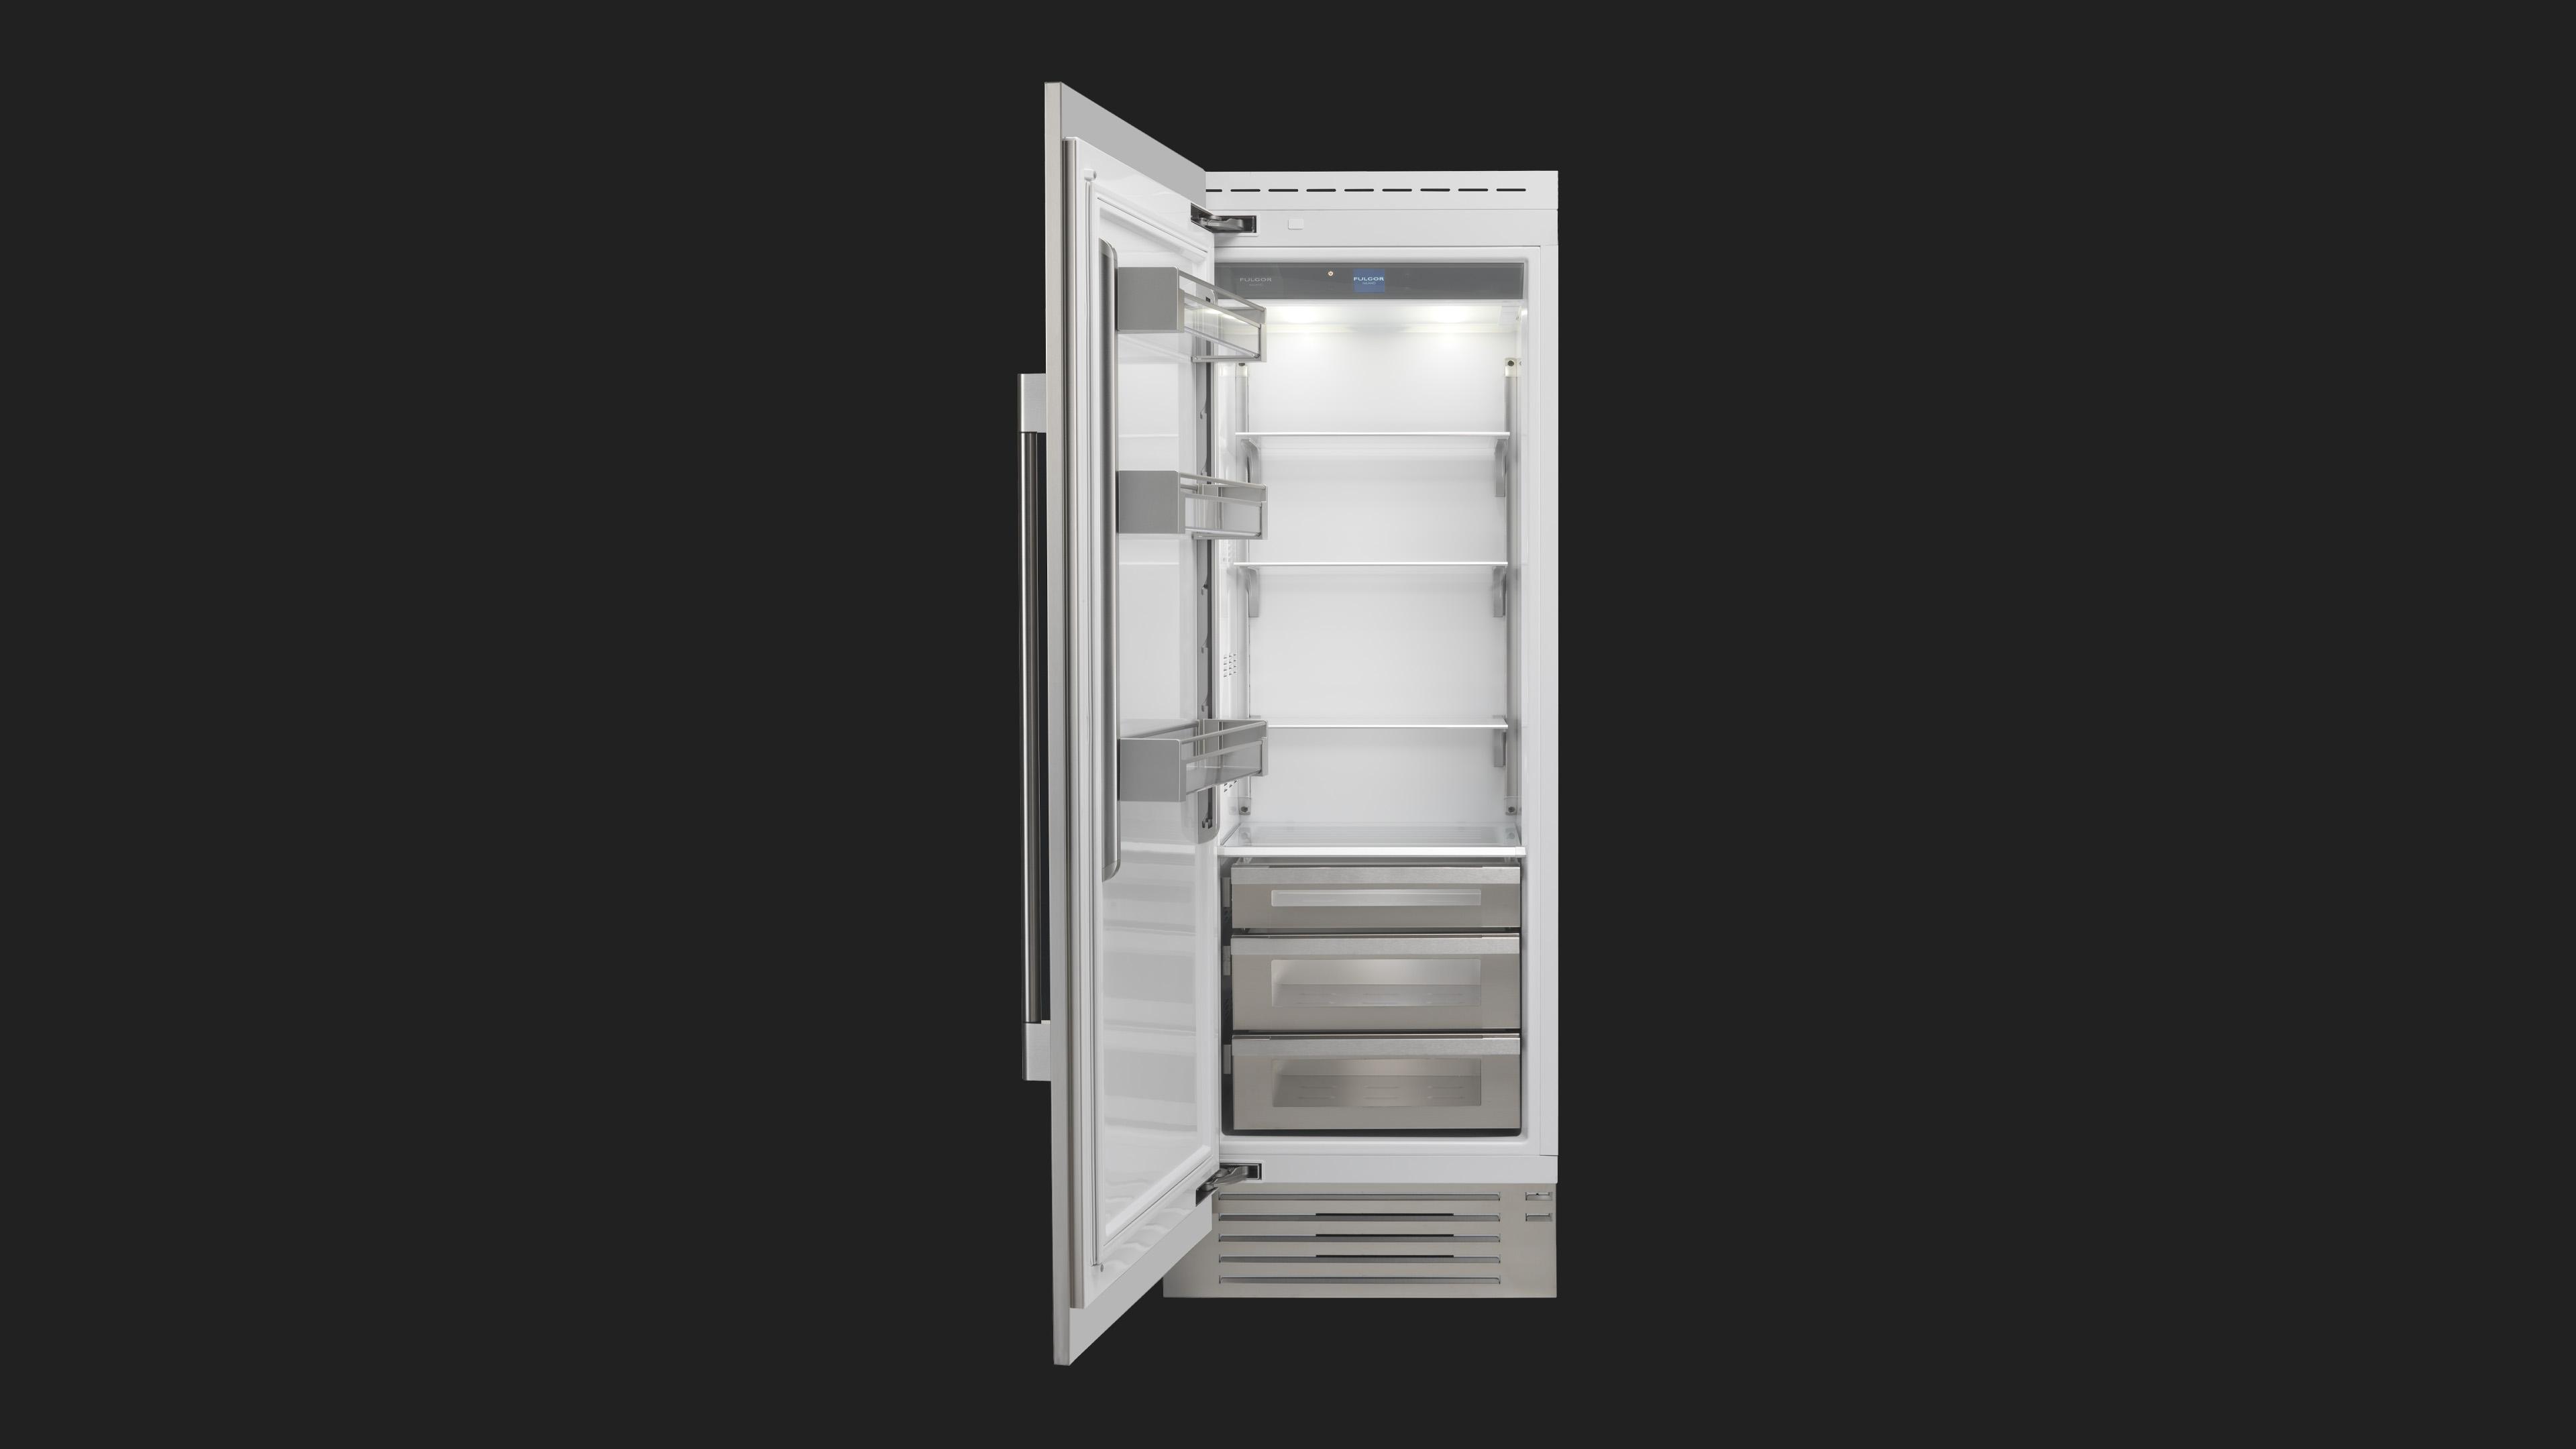 Customize Your Kitchen’s Cool with a Fulgor Milano Refrigerator